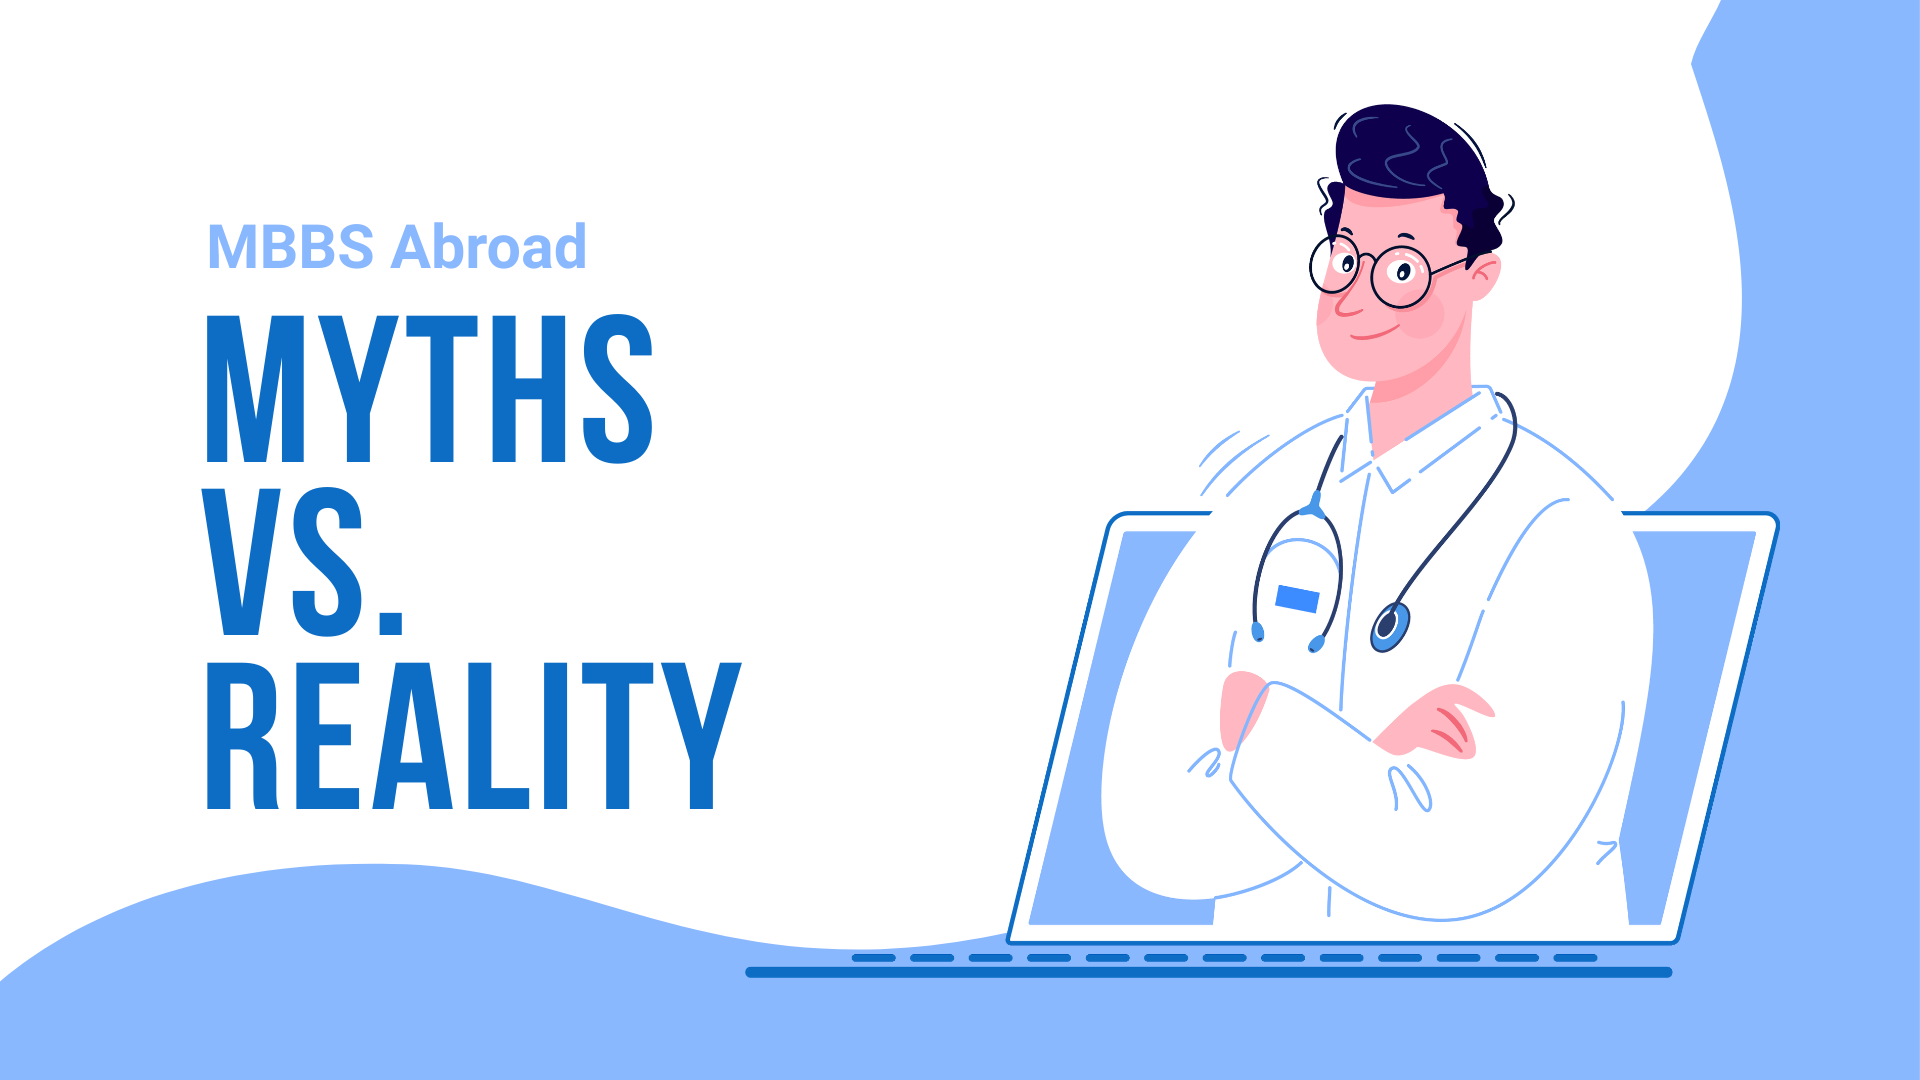 Myths and Facts about MBBS